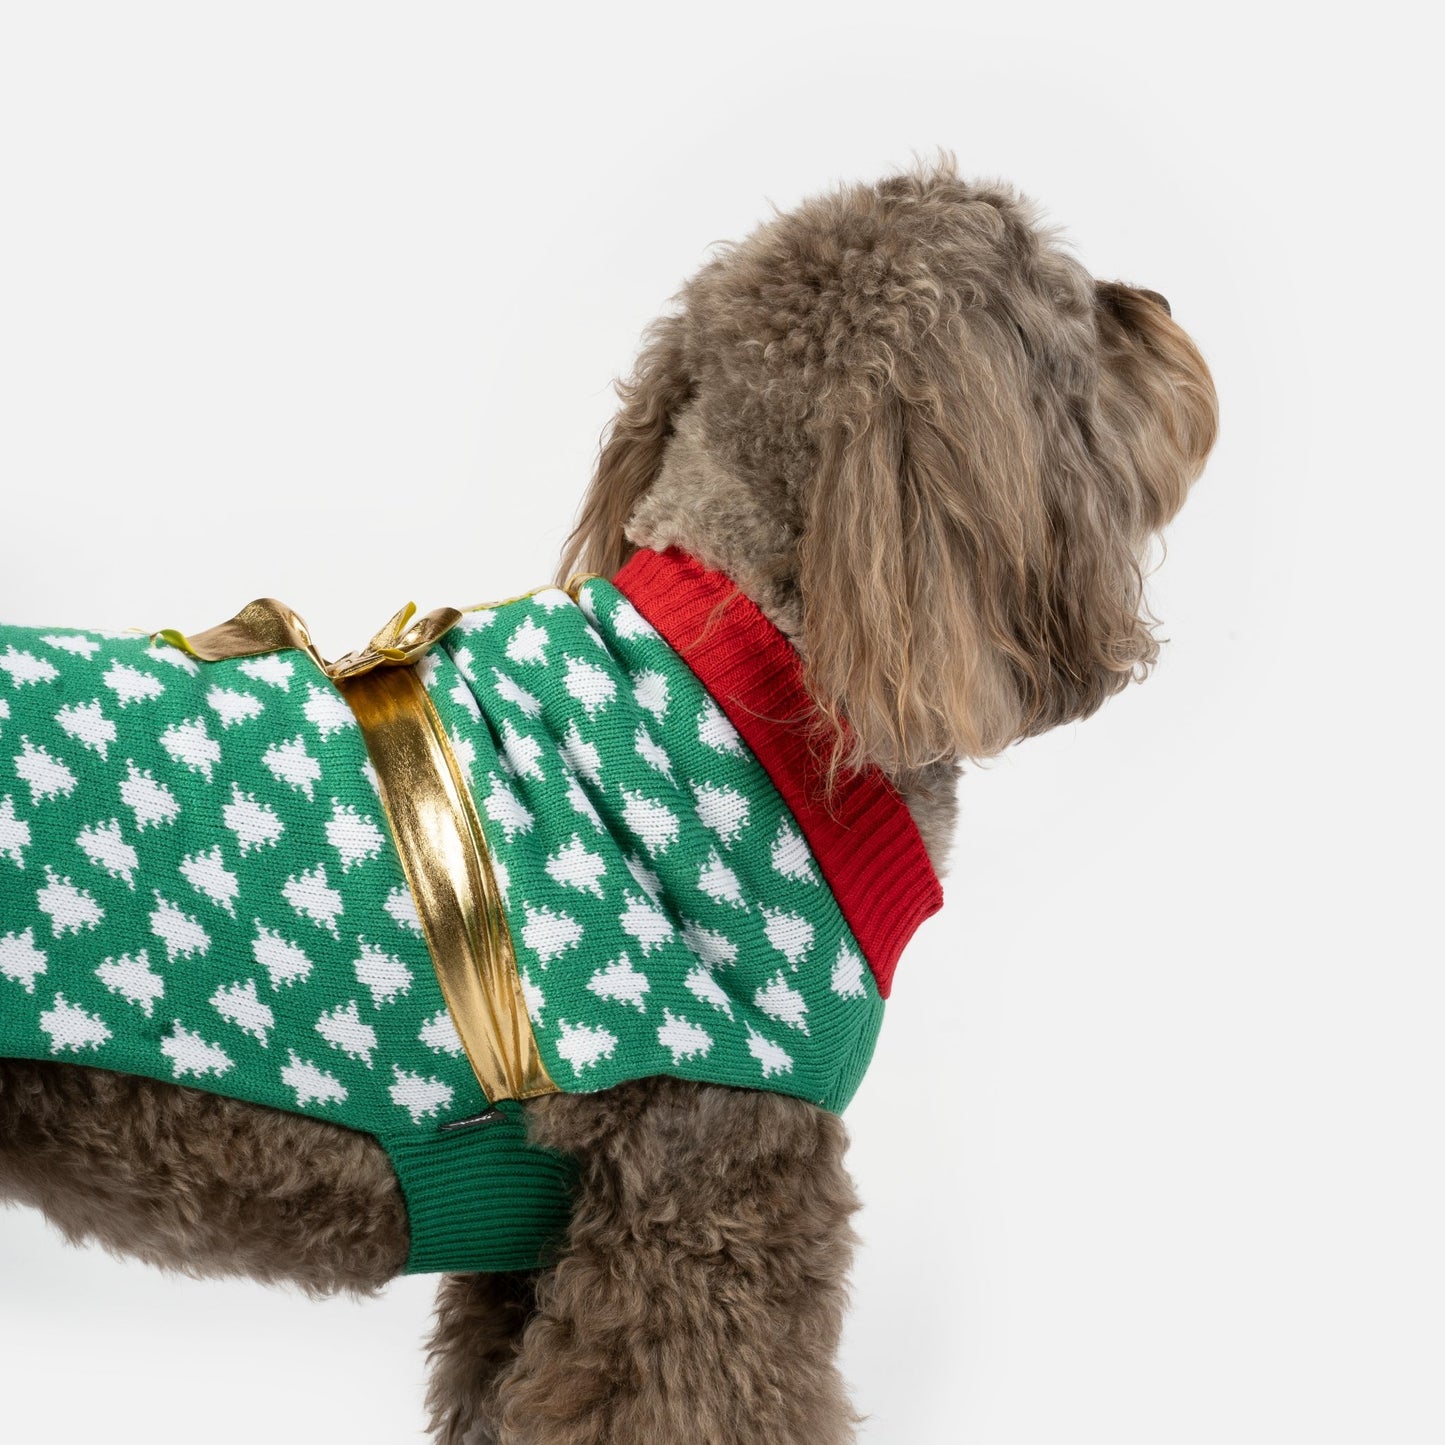 Gift Dog Sweater - Silver Paw